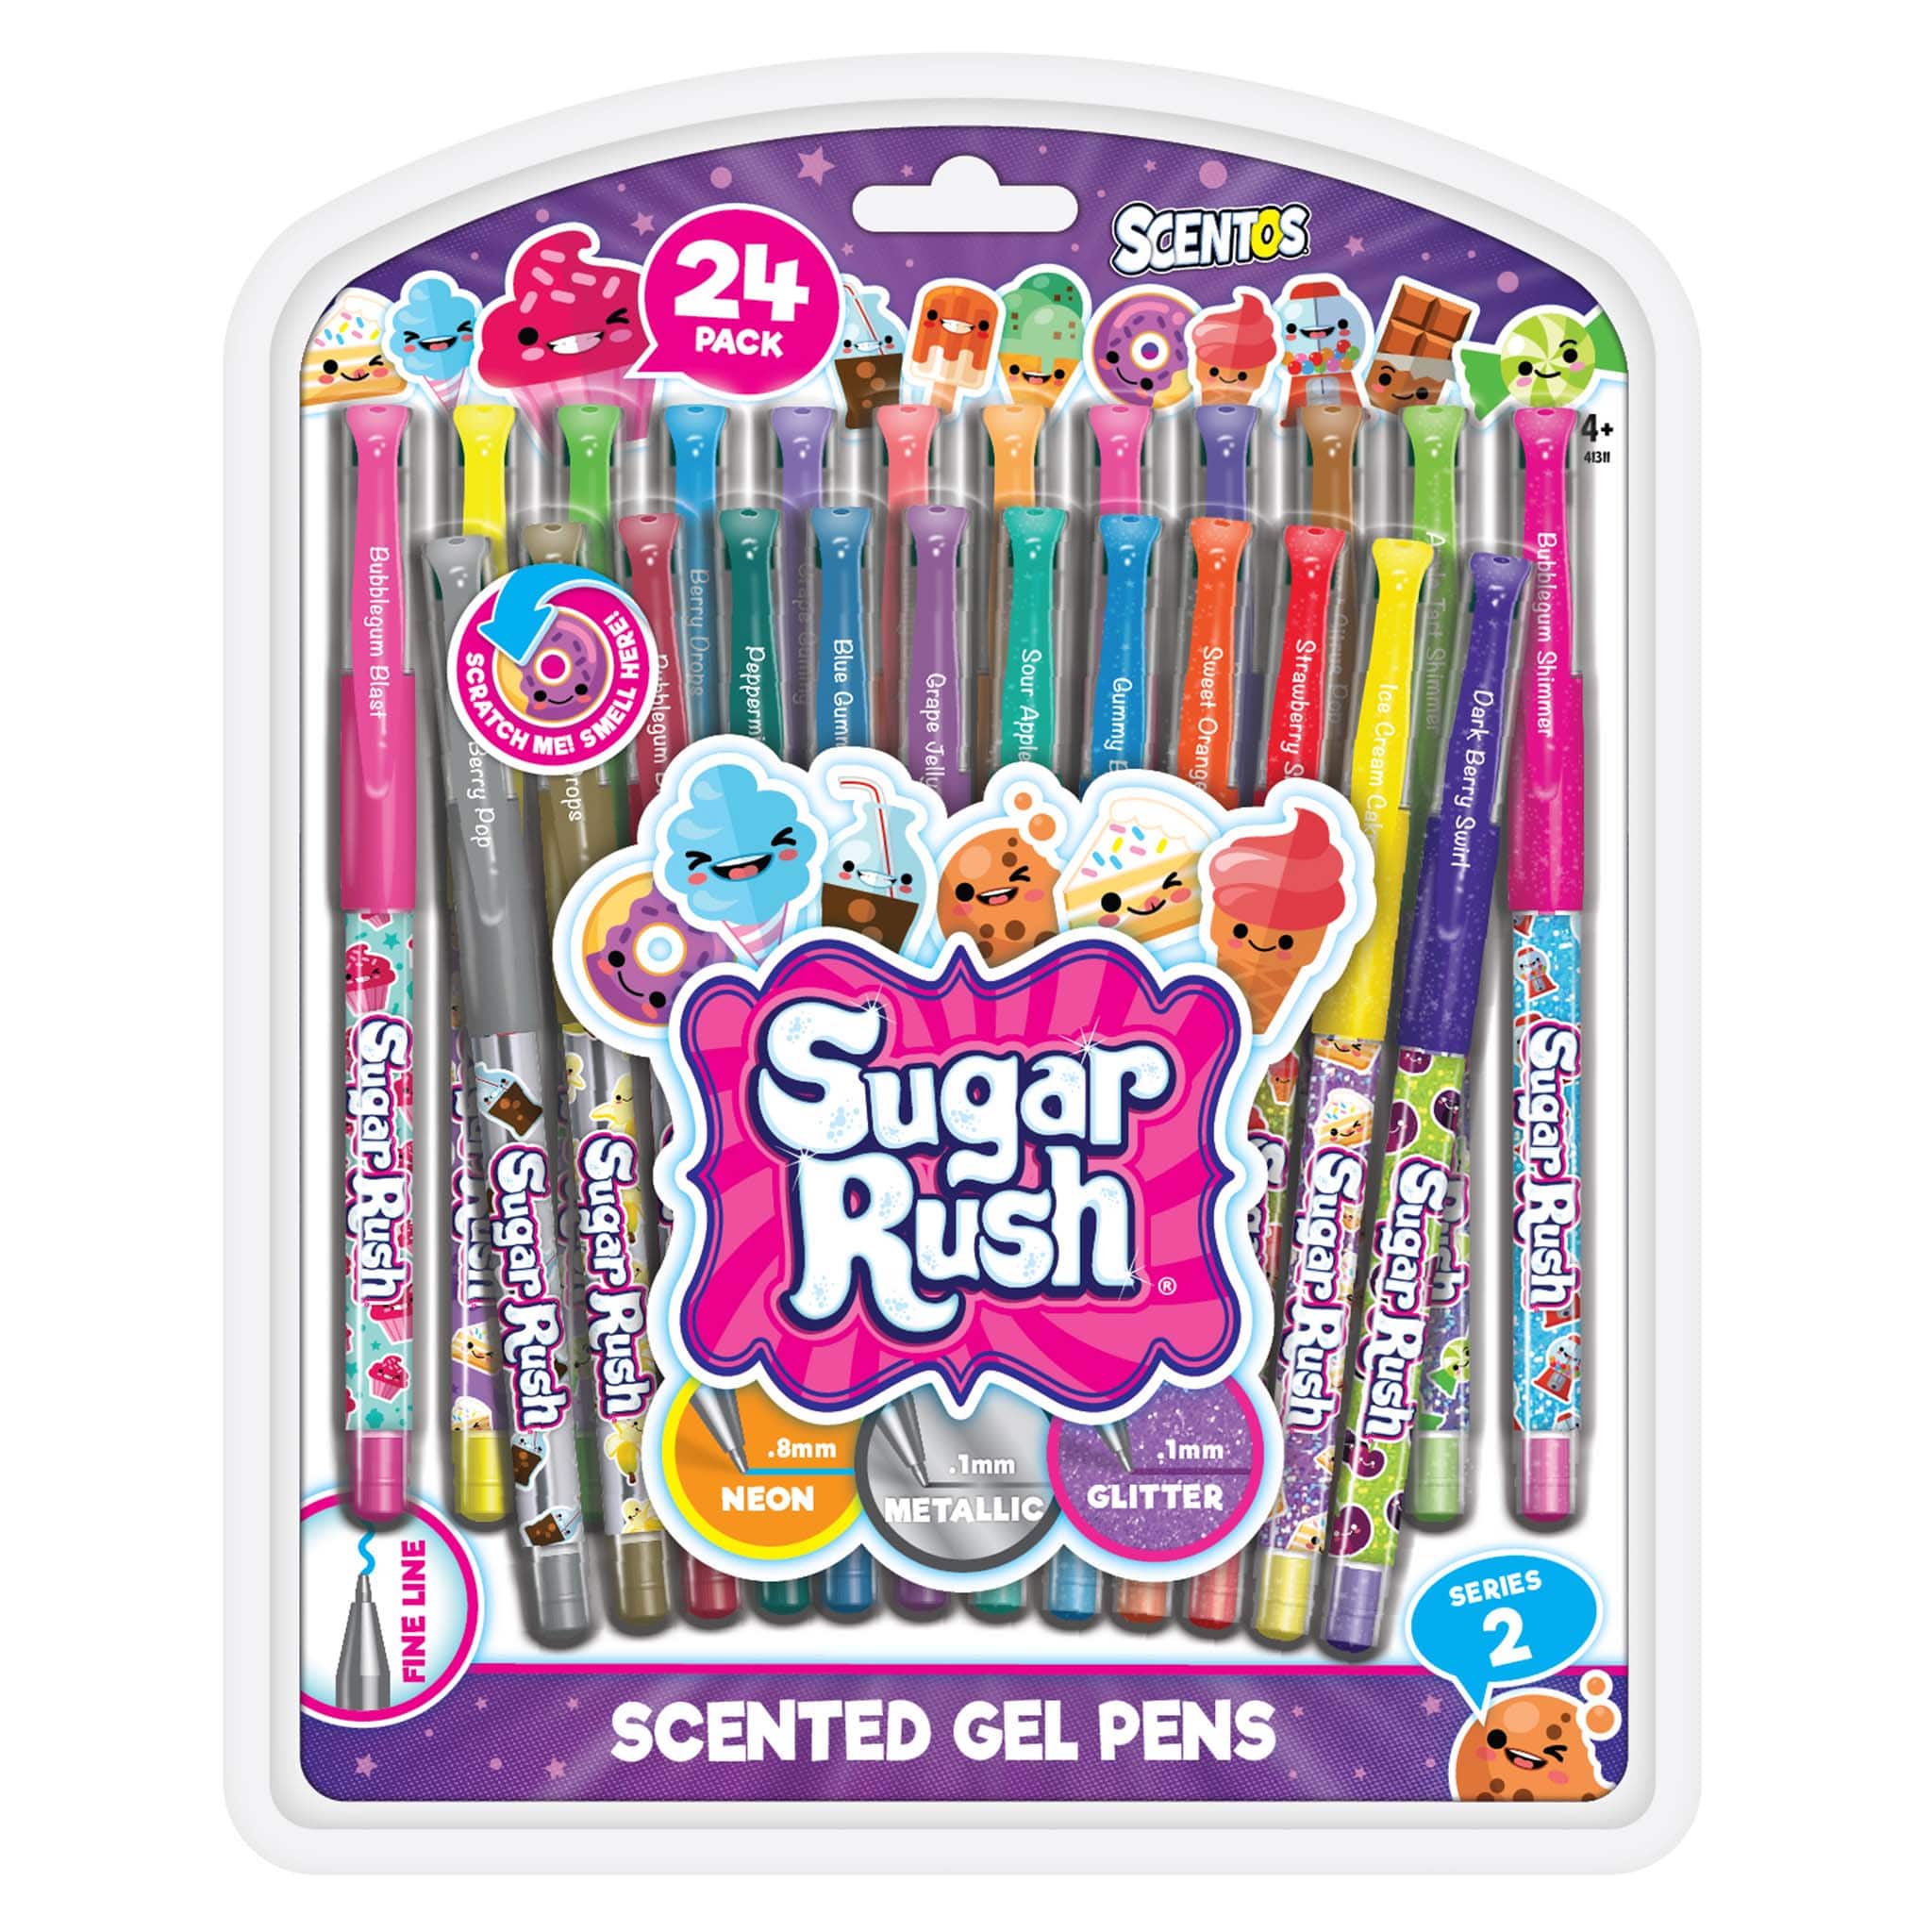  Scentos Scented Gel Pens - 24-Count - Assorted Color Pens for  Kids or Adults in Sugar Rush Candy Scents - Cool Writing & Journaling Gift  Idea : Office Products